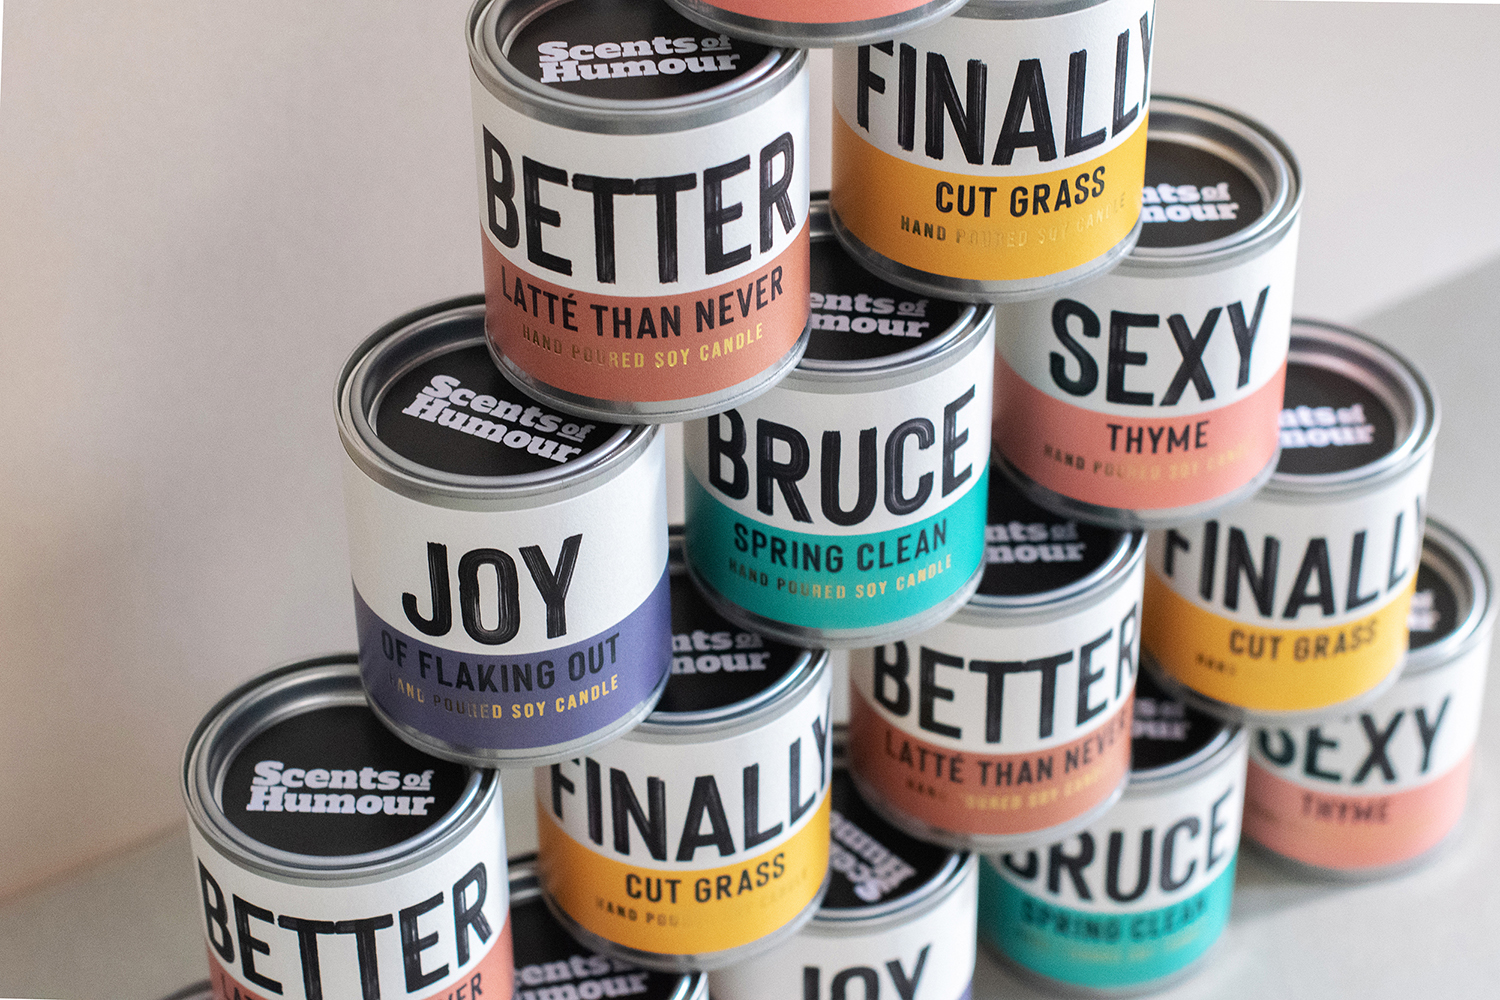 Scents of Humour Launches Playful Candle and Create Brand and Packaging Design In-House